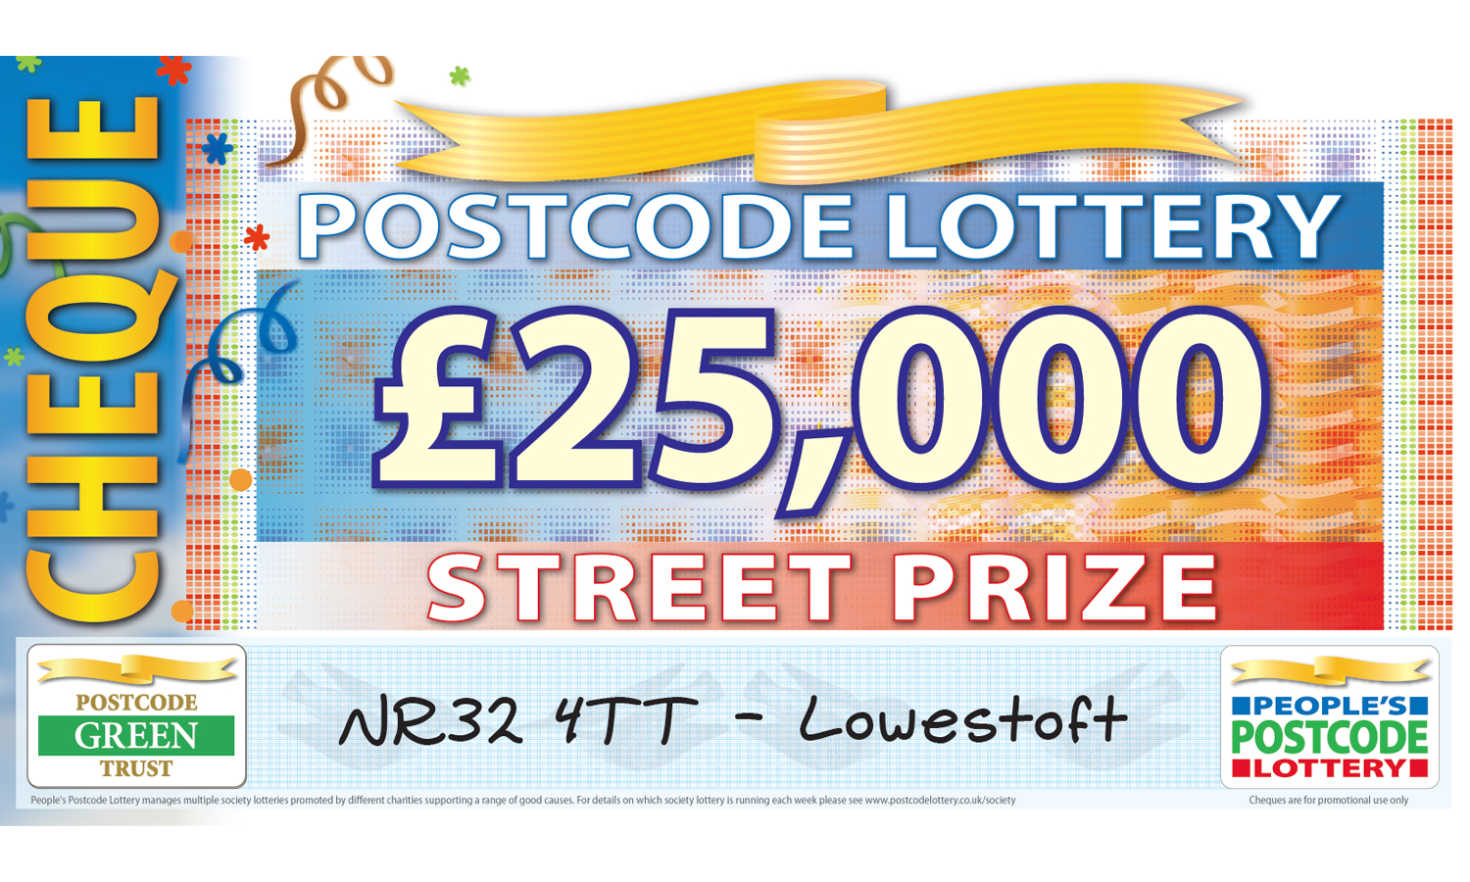 One lucky Lowestoft player has scooped £25,000 this weekend